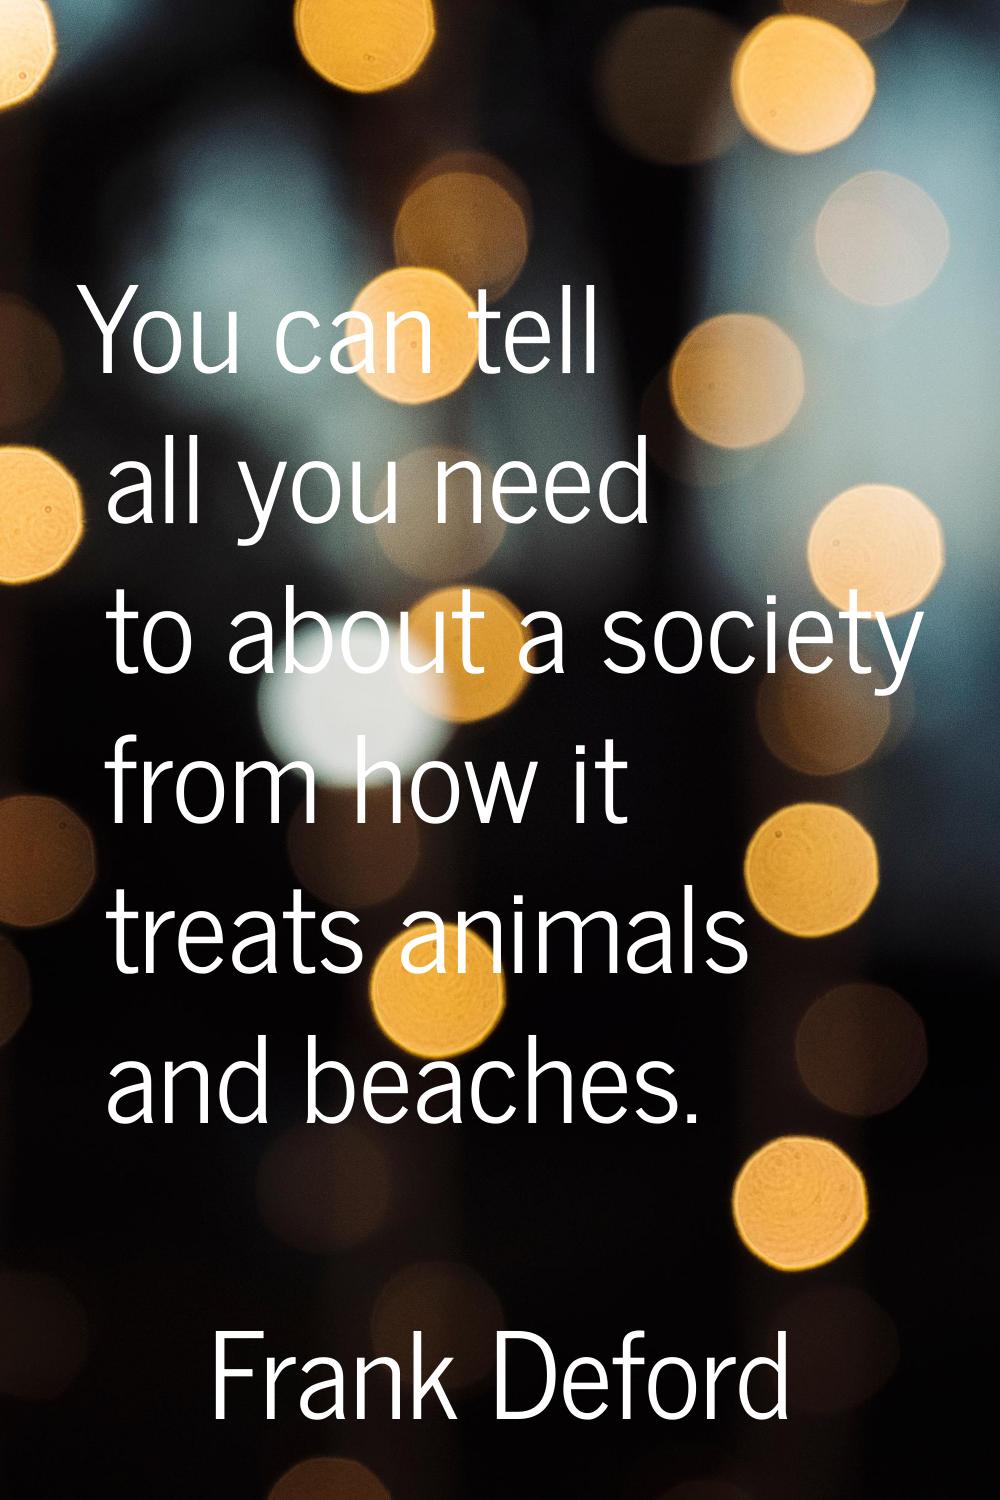 You can tell all you need to about a society from how it treats animals and beaches.